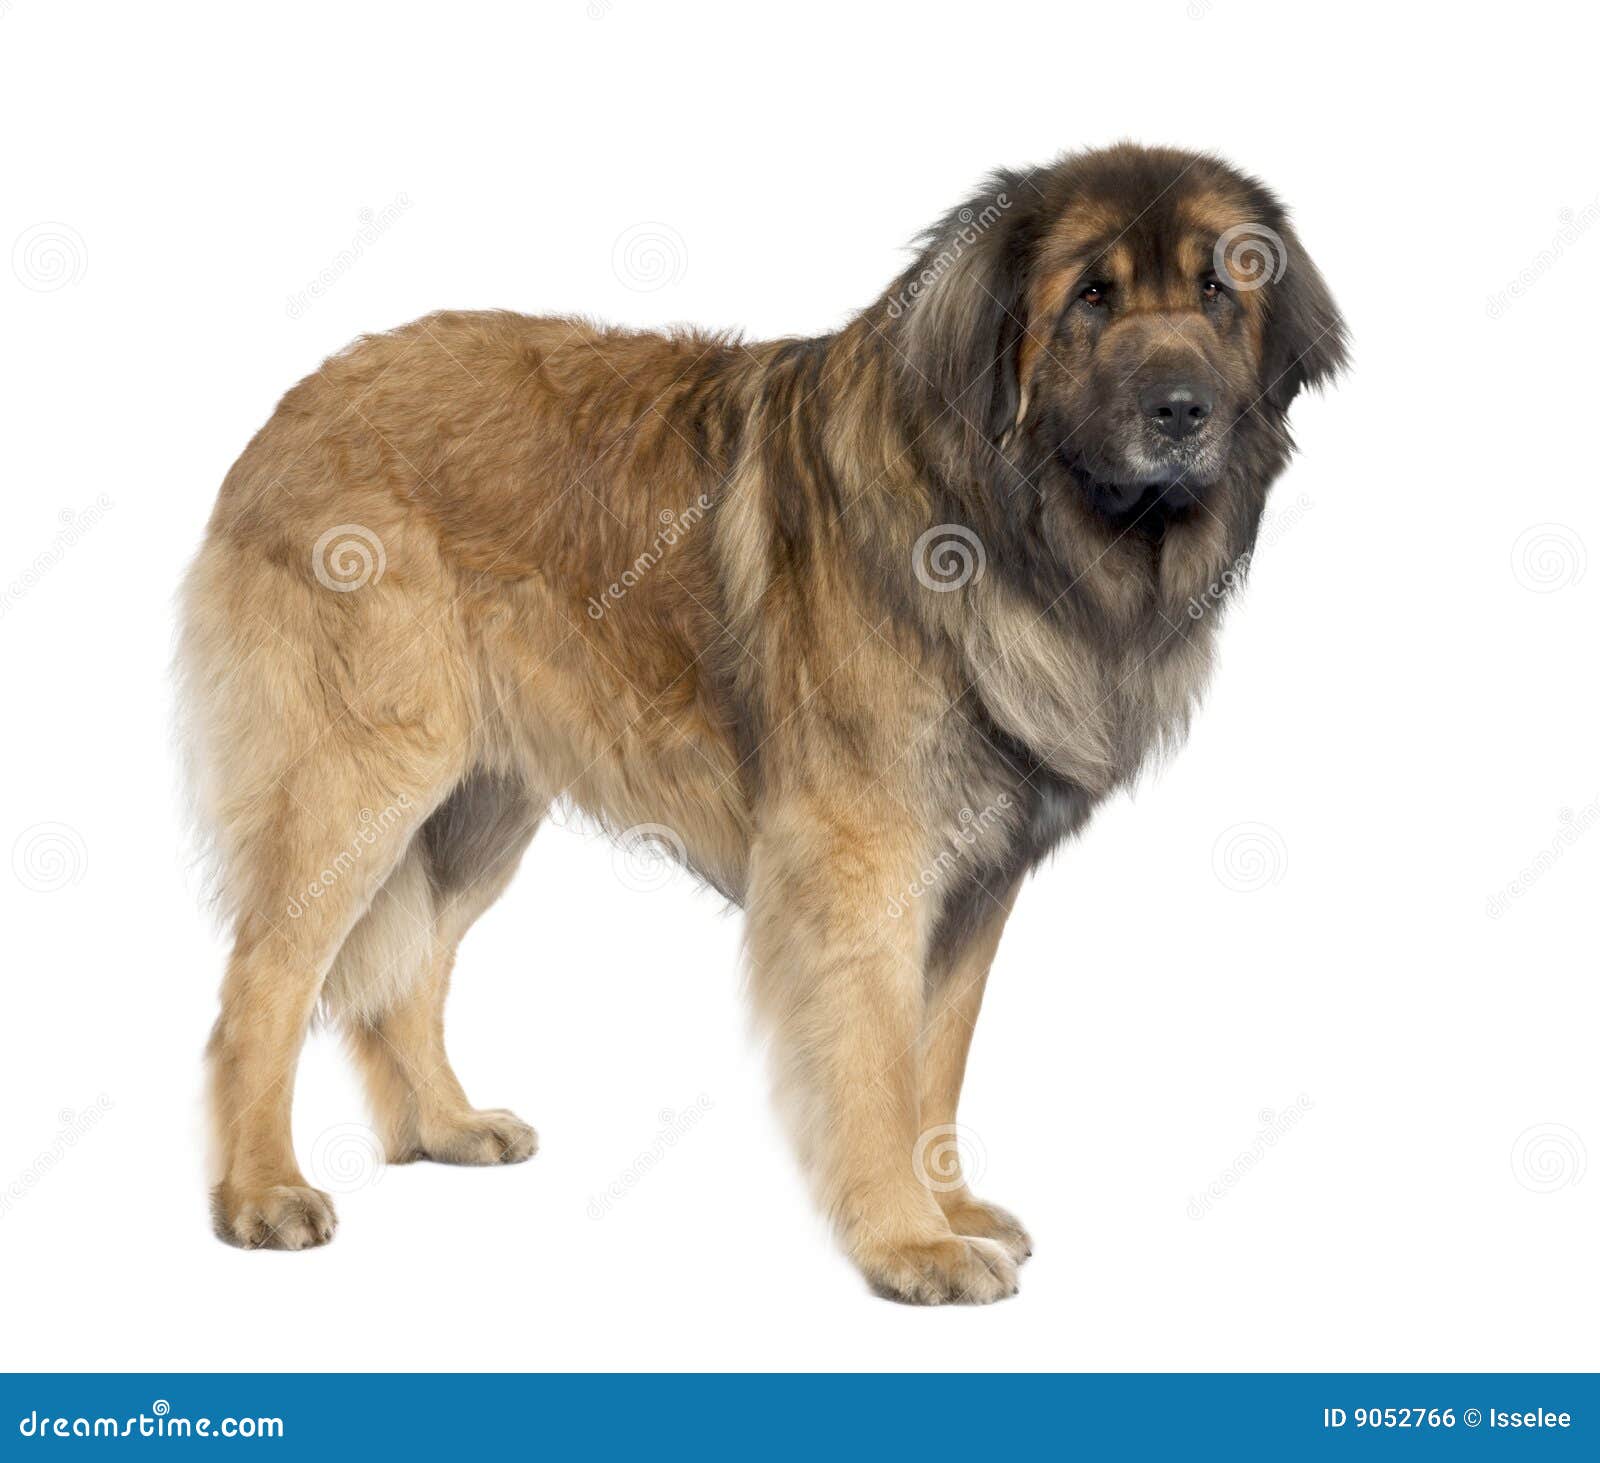 leonberger (3 years old)